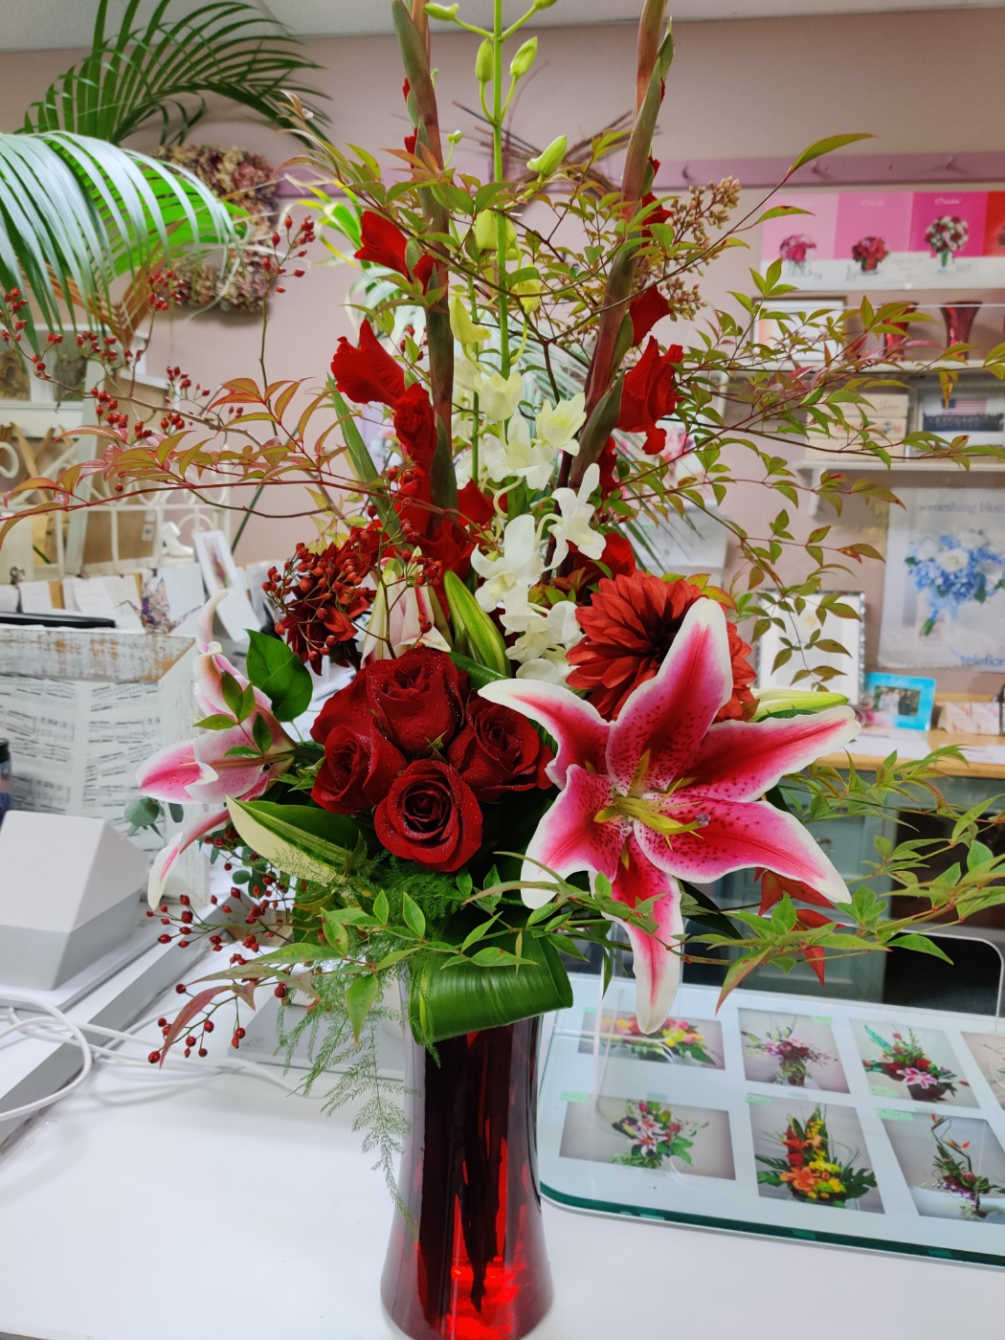 Contains Gladiolus, Orchids, Roses, Stargazer, Dahlia, Cox in a Tall Red Vase